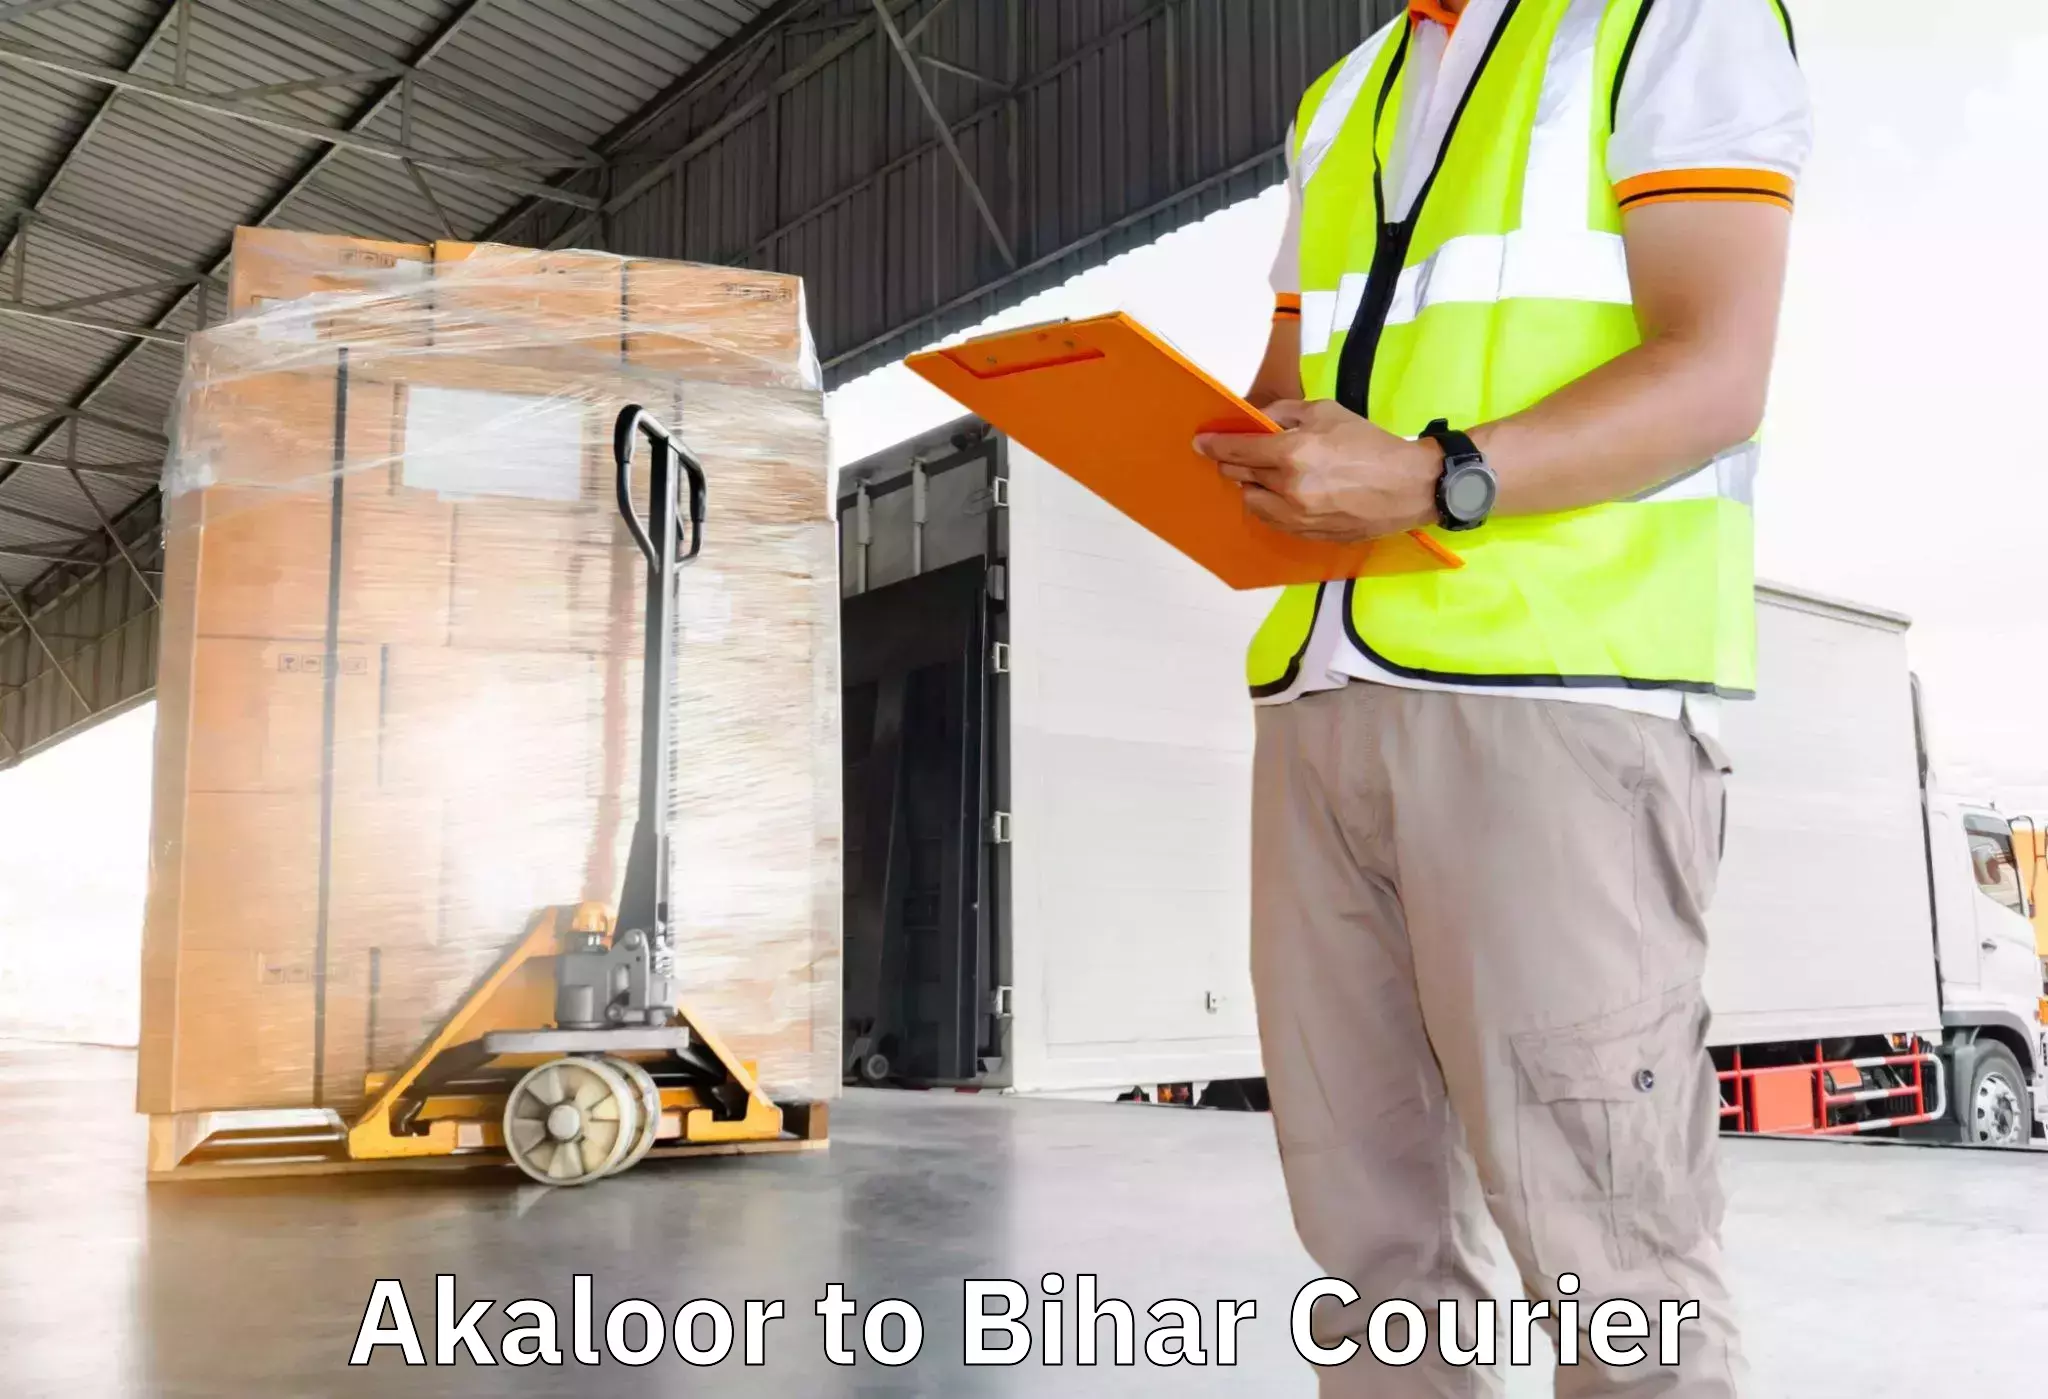 Furniture delivery service Akaloor to Kochas